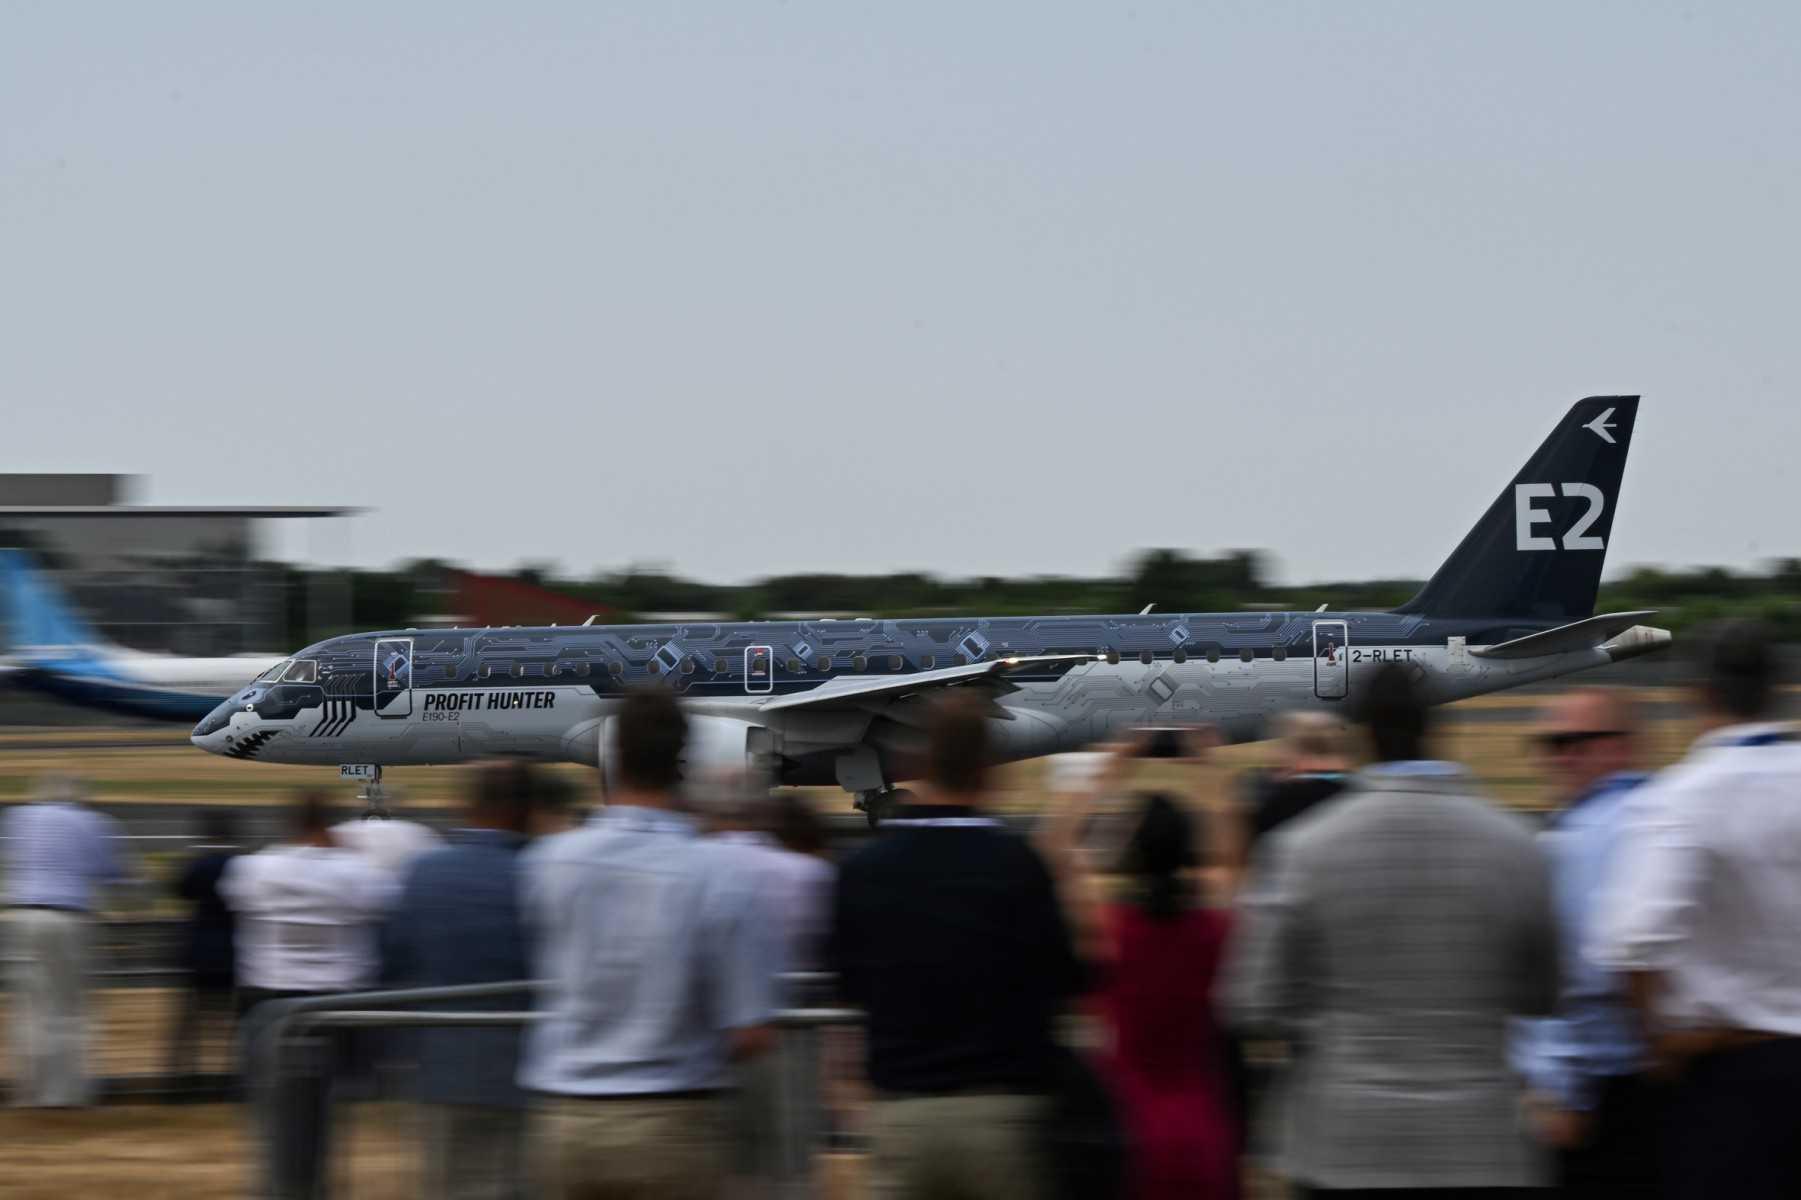 Visitors look at the Embraer E2 Profit Hunter plane taking off during the airshow of the Farnborough Airshow, in Farnborough, on July 18. Photo: AFP